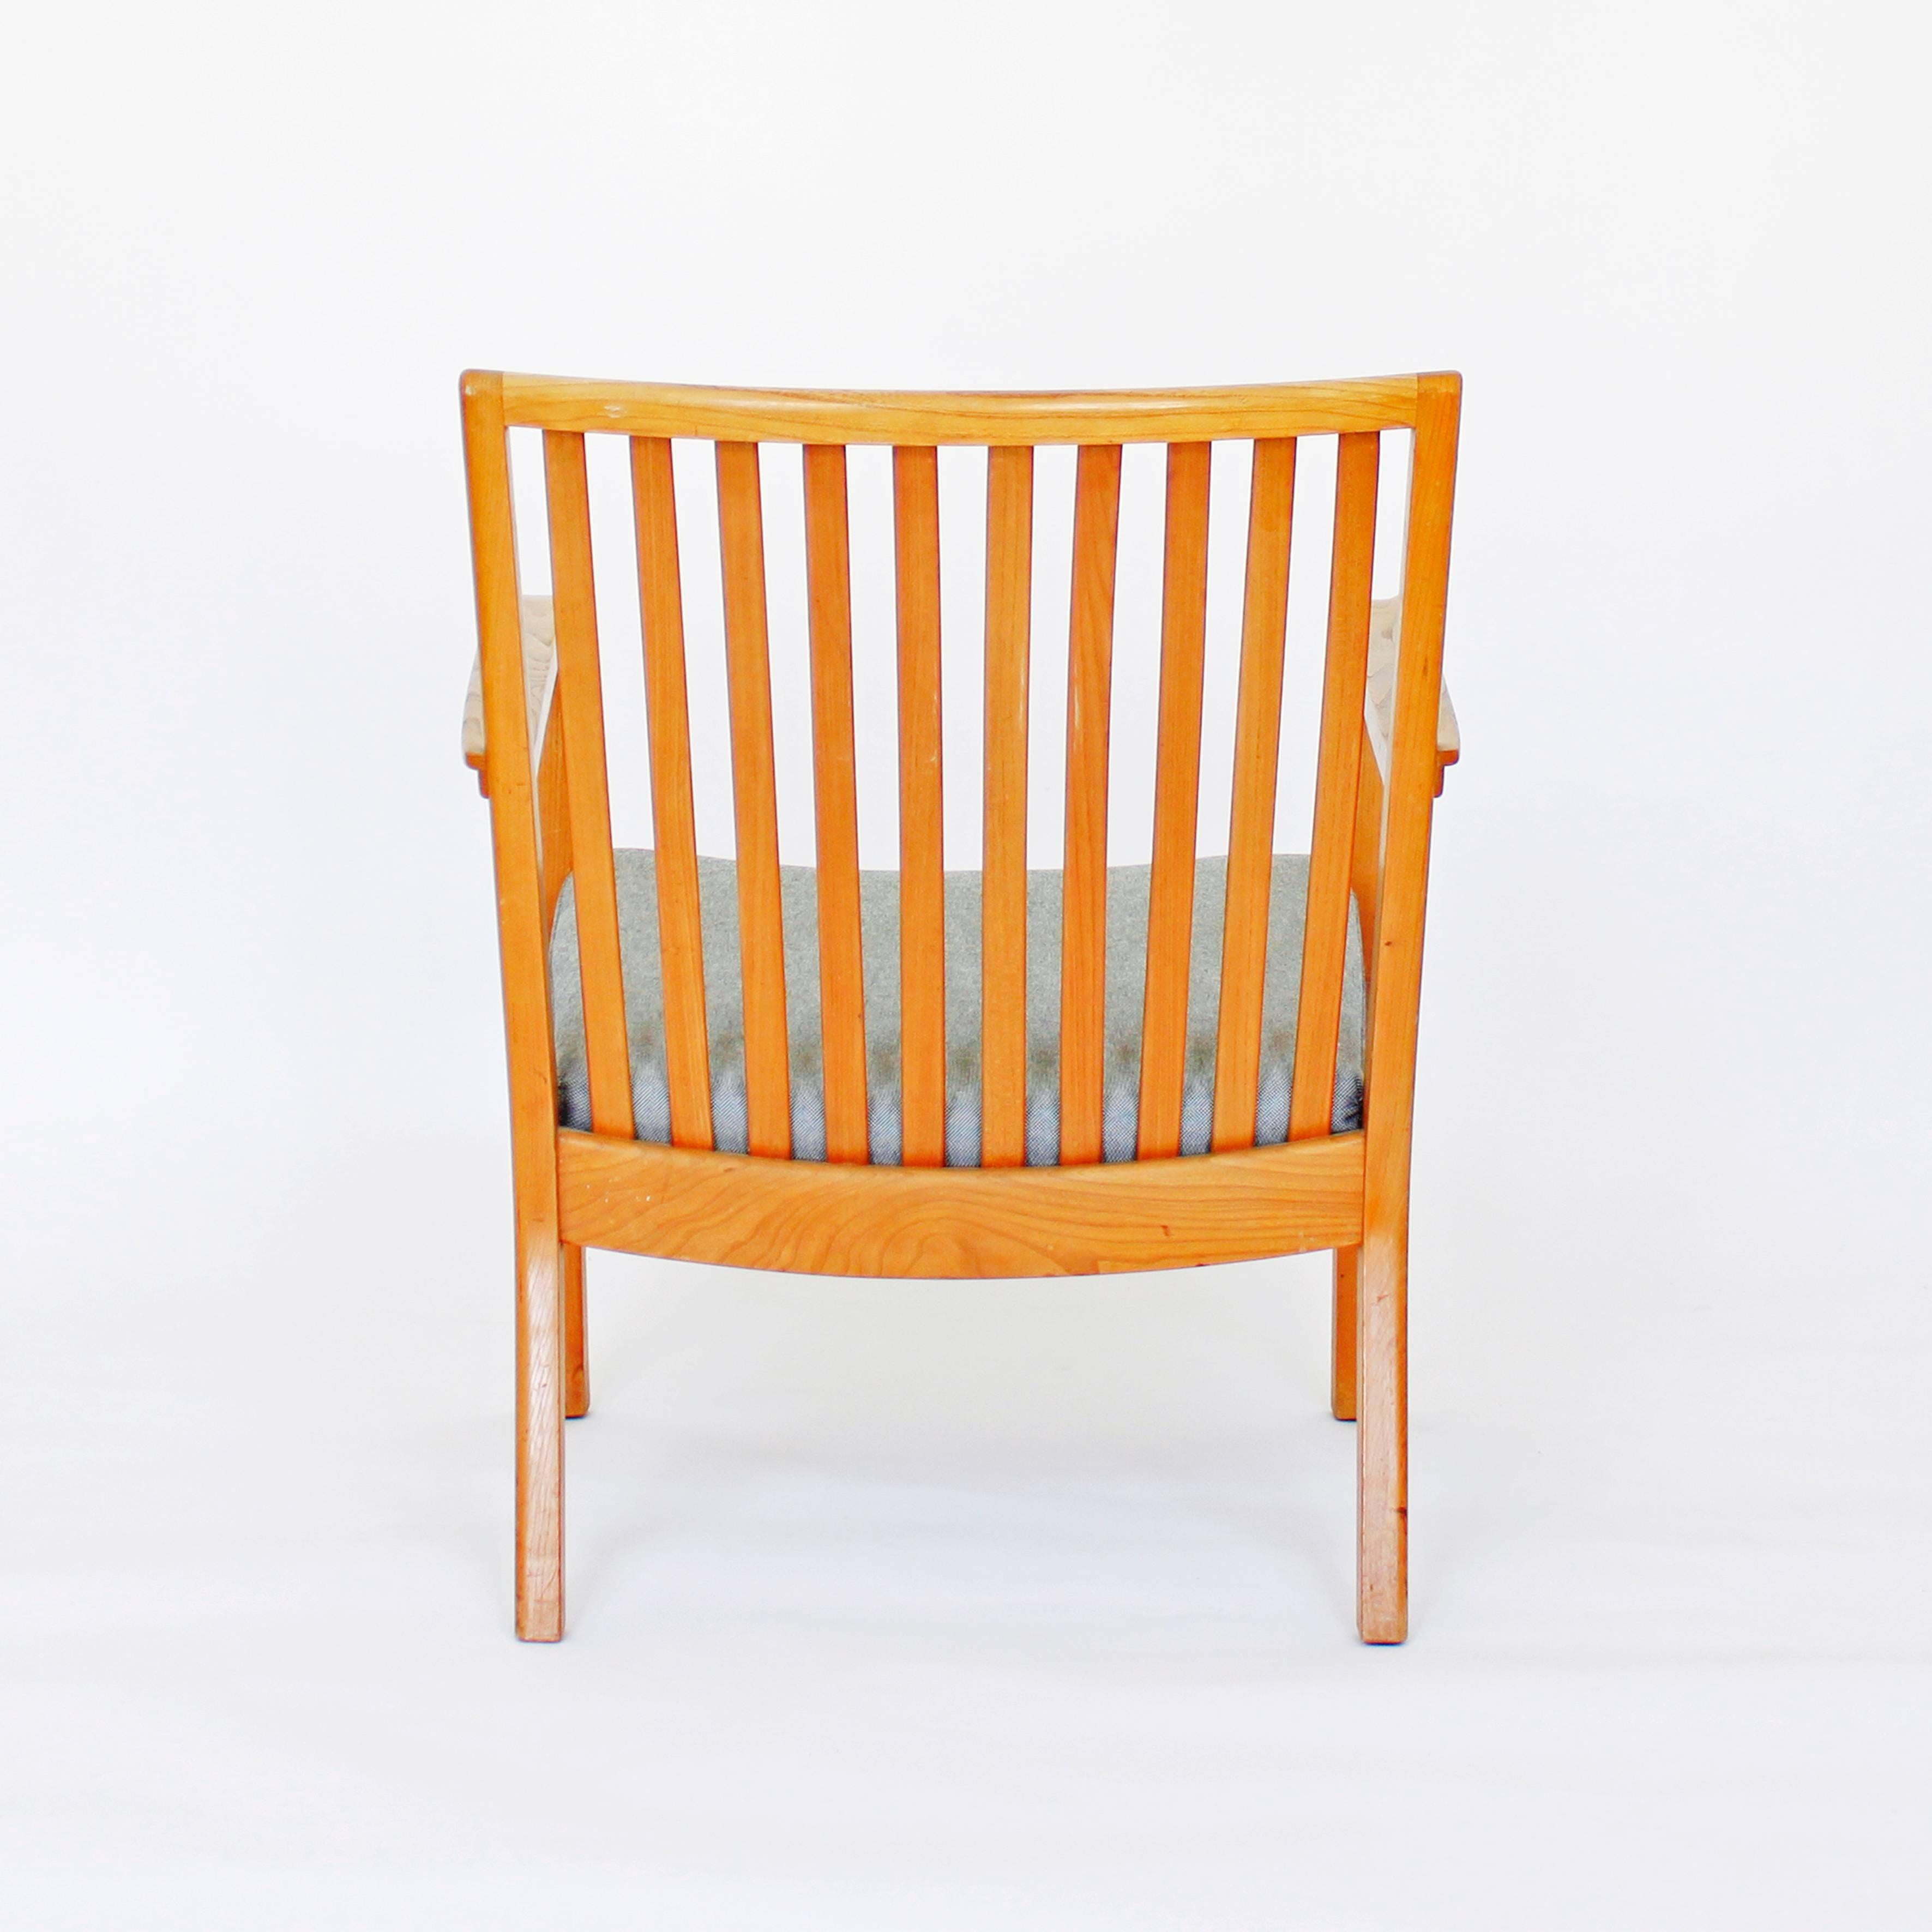 Deco era Danish armchair in walnut wood designed by Edvard Kindt-Larsen for Gustav Bertelsen. We do have a back cushion but we think it looks best with the spokes exposed

Most Kindt-Larsen designs are attributed both to Edvard and his wife Tove,